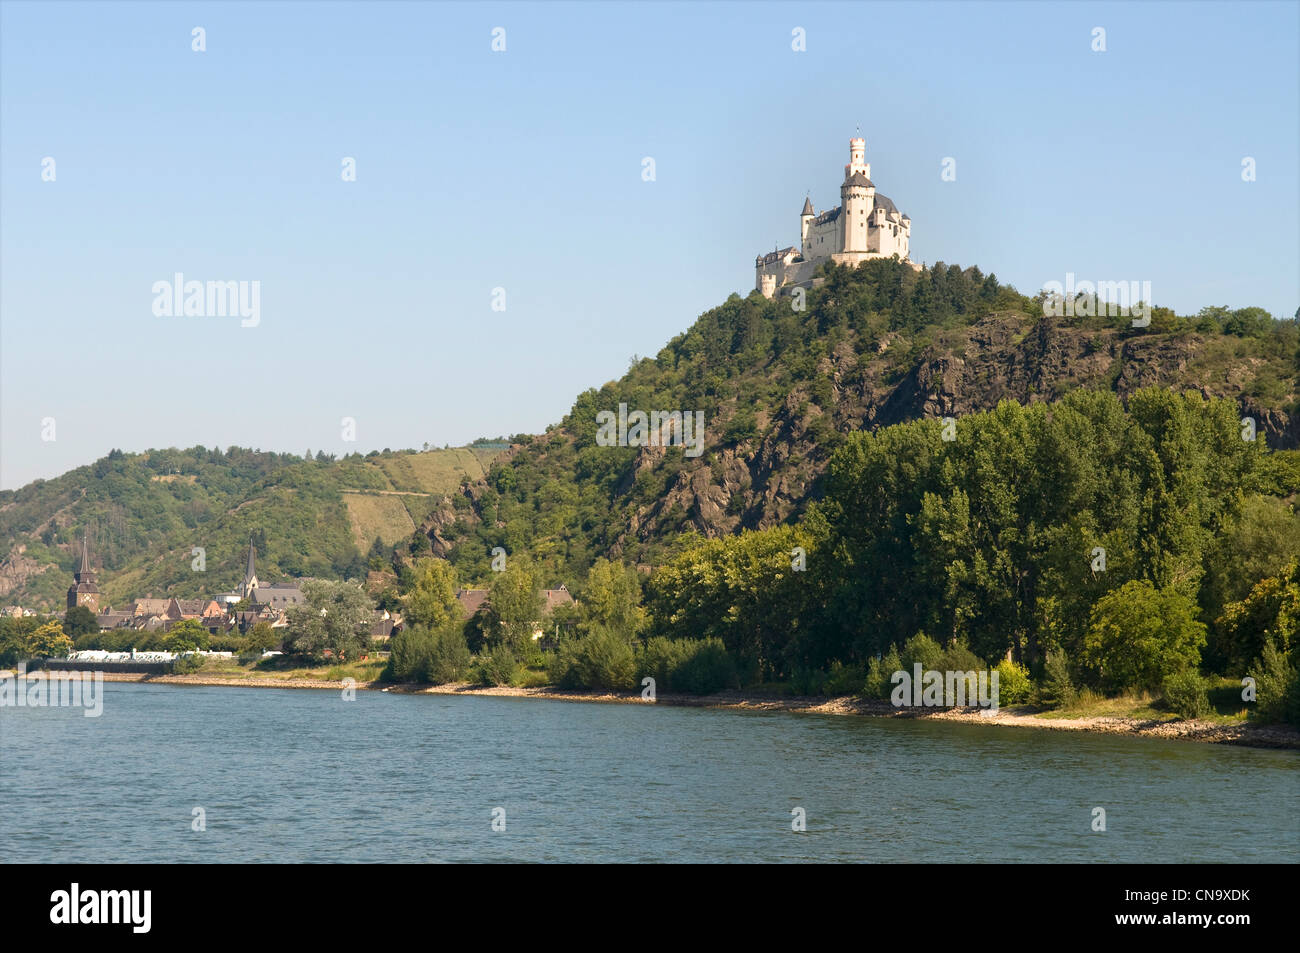 Germany, Rhineland Palatinate, Braubach, castle of Marksburg, the romantic Rhine listed as World Heritage by UNESCO Stock Photo